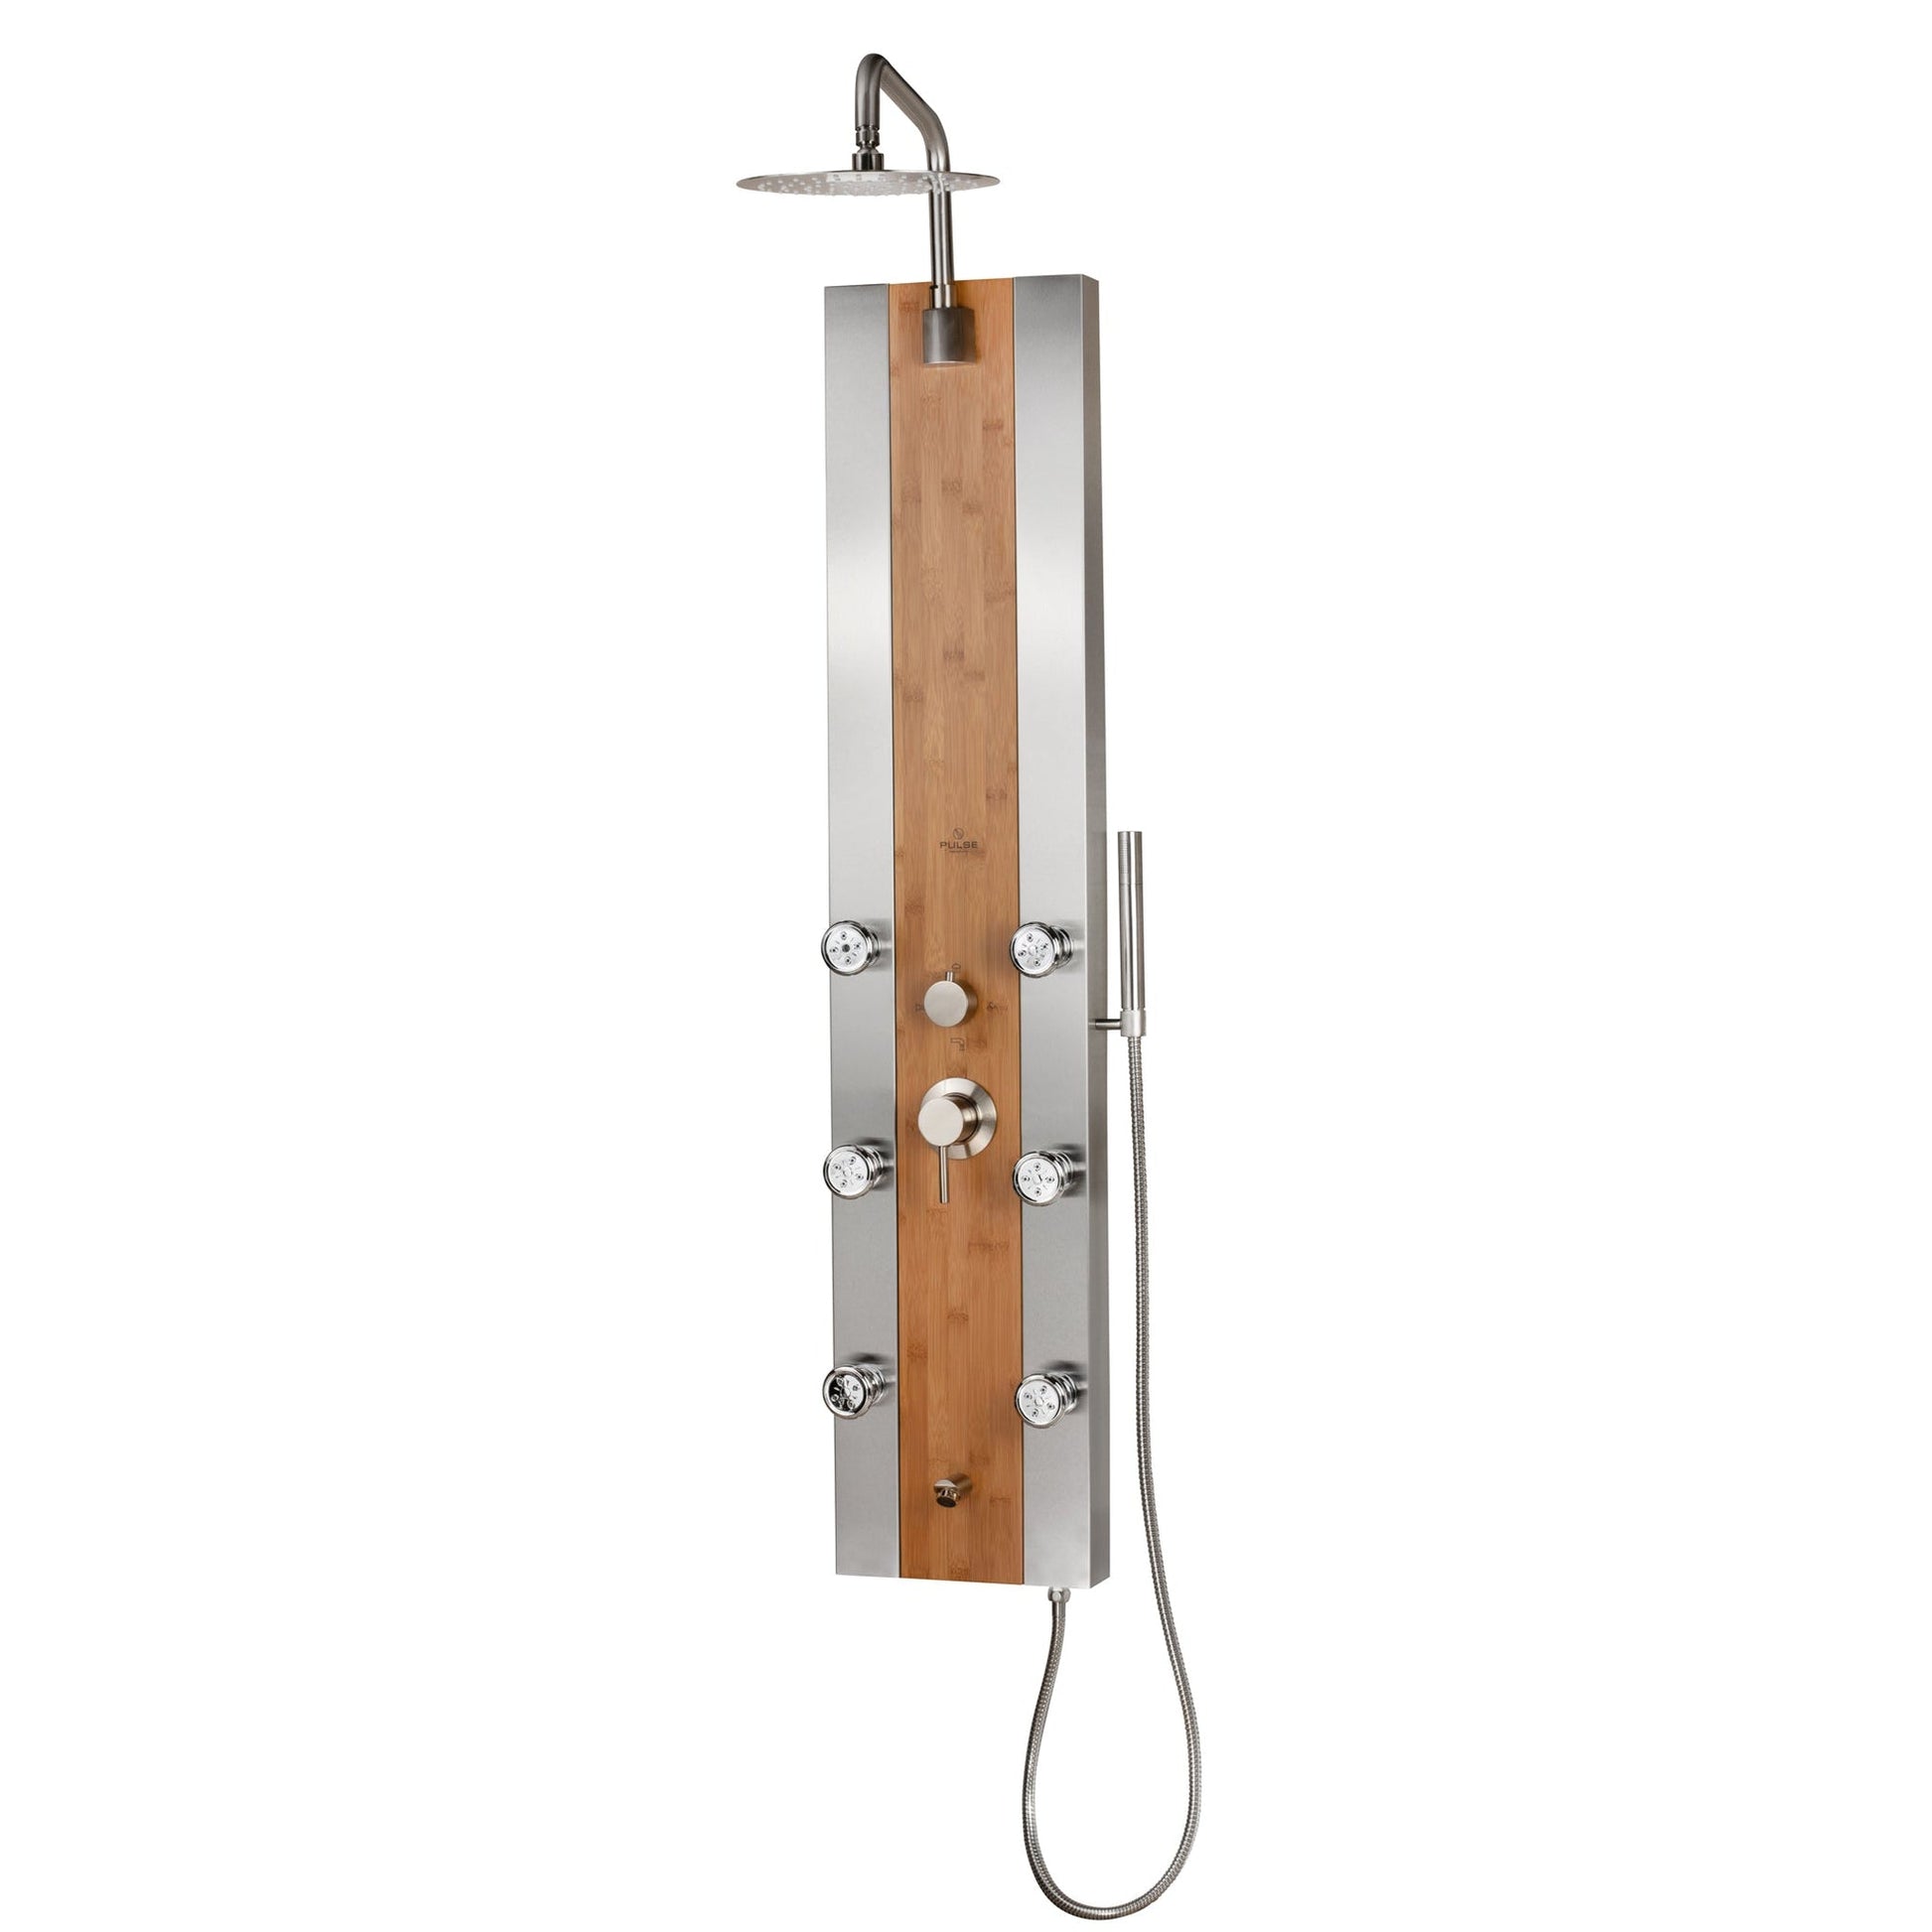 PULSE ShowerSpas Bali 59" Rain Shower Panel in Bamboo and Brushed Stainless Steel Finish With 6-Single Function Body Jets and Hand Shower